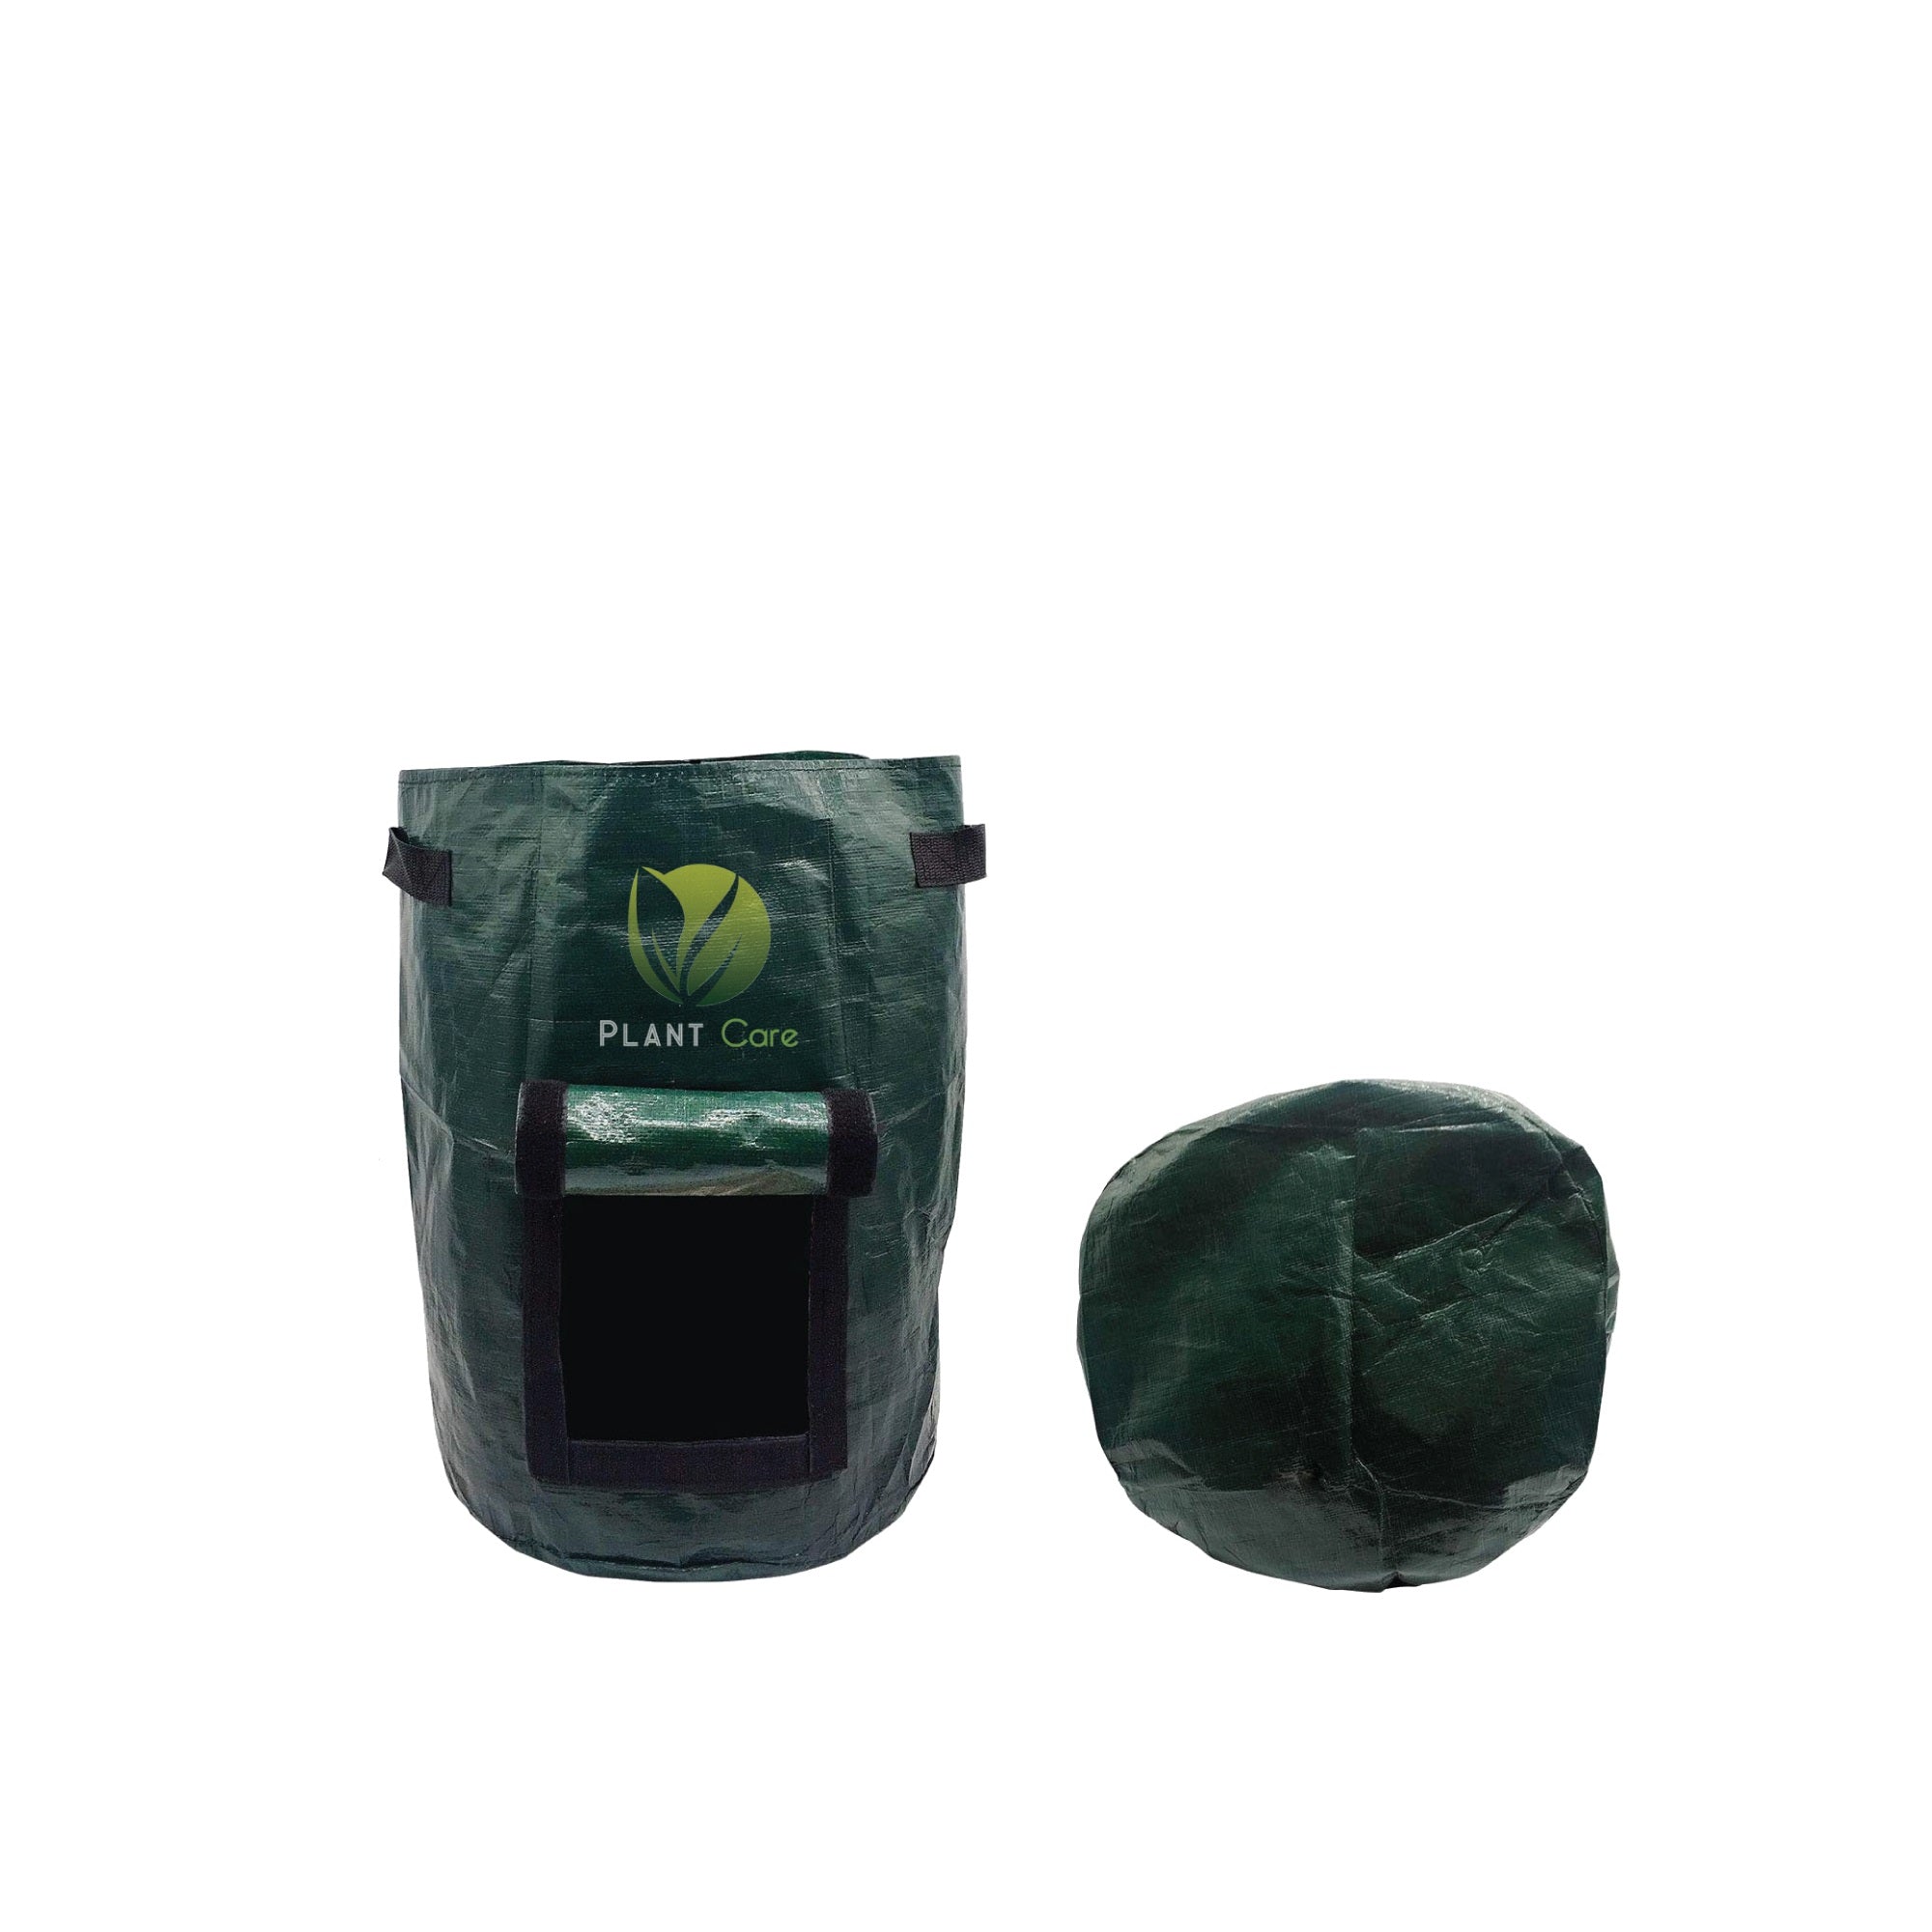 An olive green 10x12 inch potato grow bag with sturdy handles, designed for growing potatoes in small spaces